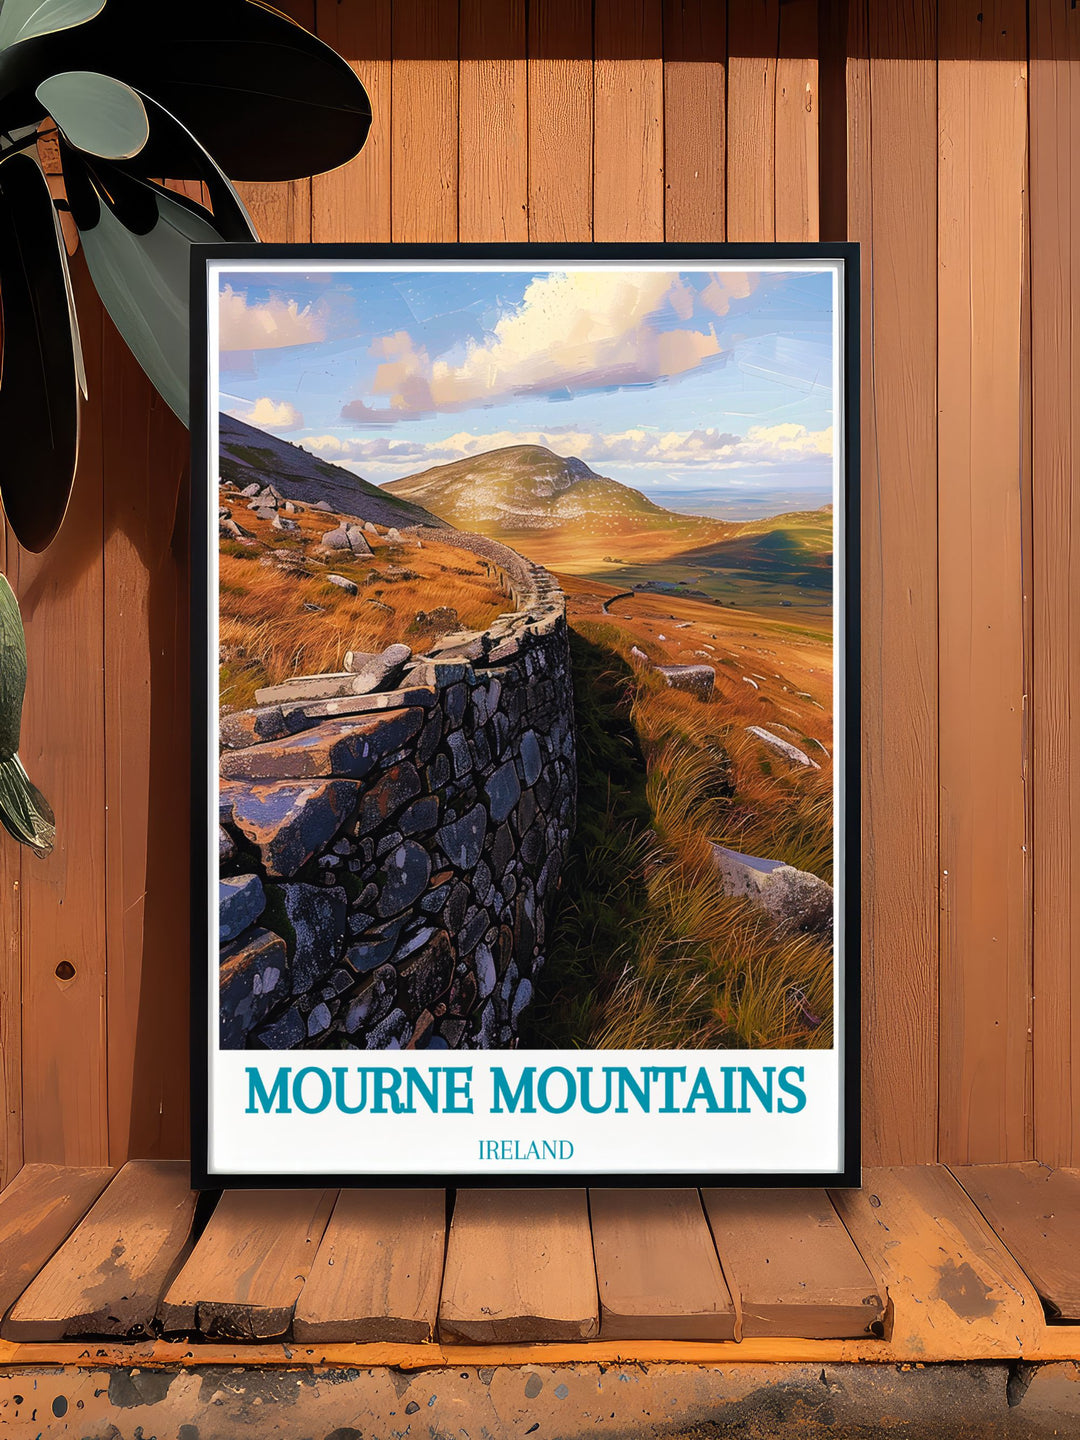 Featuring the iconic peaks and historic wall of the Mourne Mountains, this poster showcases the regions inviting landscapes and rich history, perfect for those who cherish natural and cultural destinations.